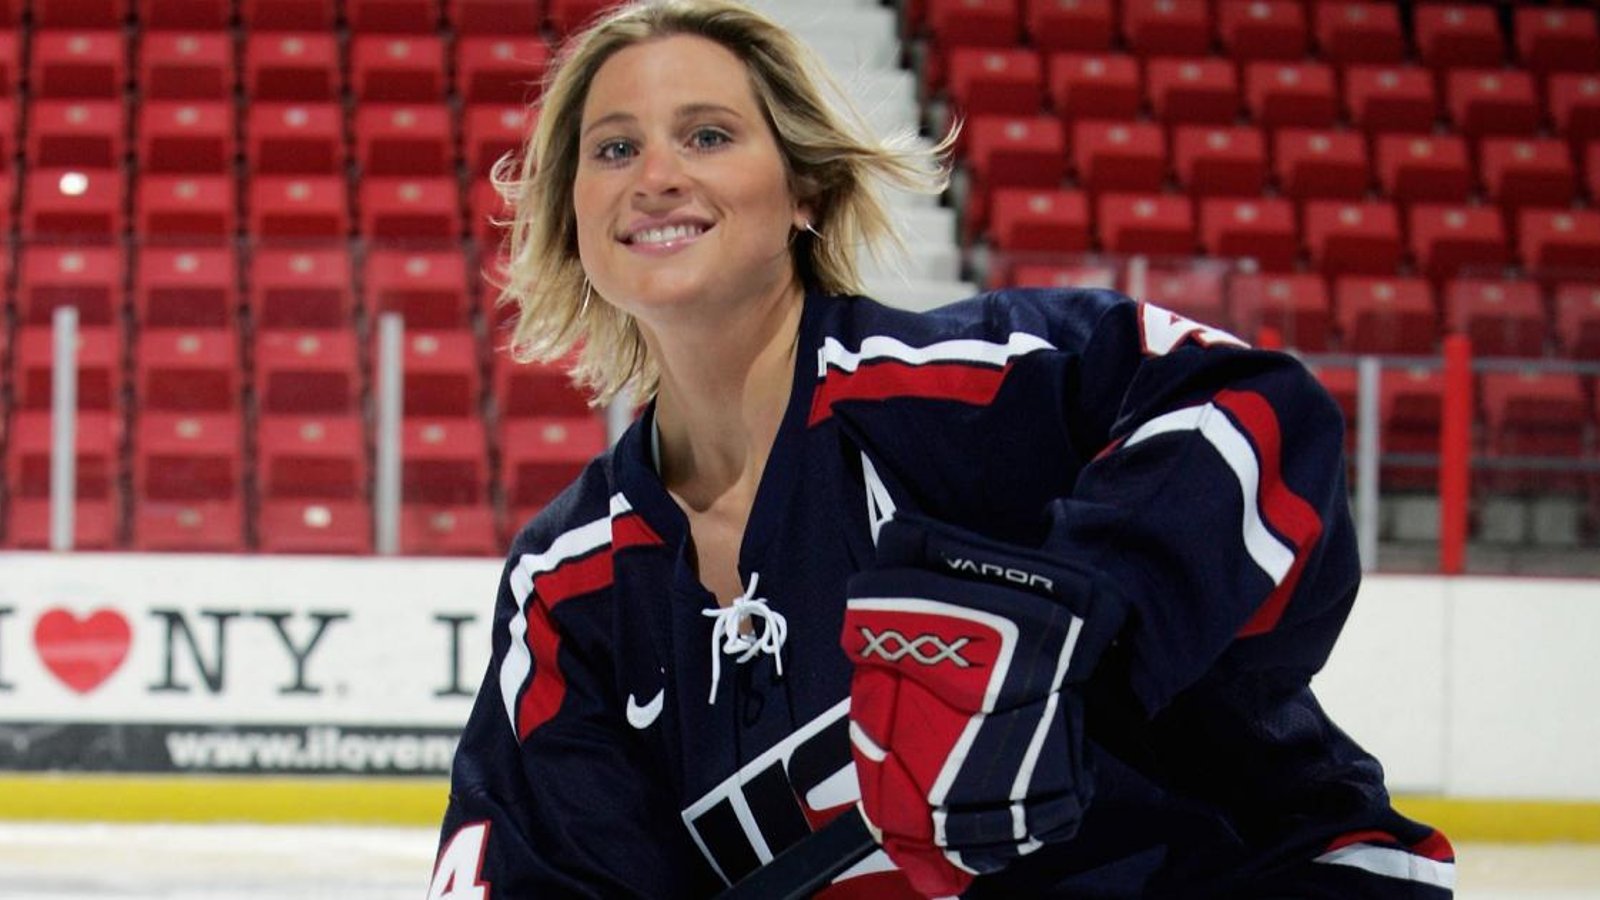 Former Olympic Gold Medalist making waves as potential candidate to be the NHL's first female GM.